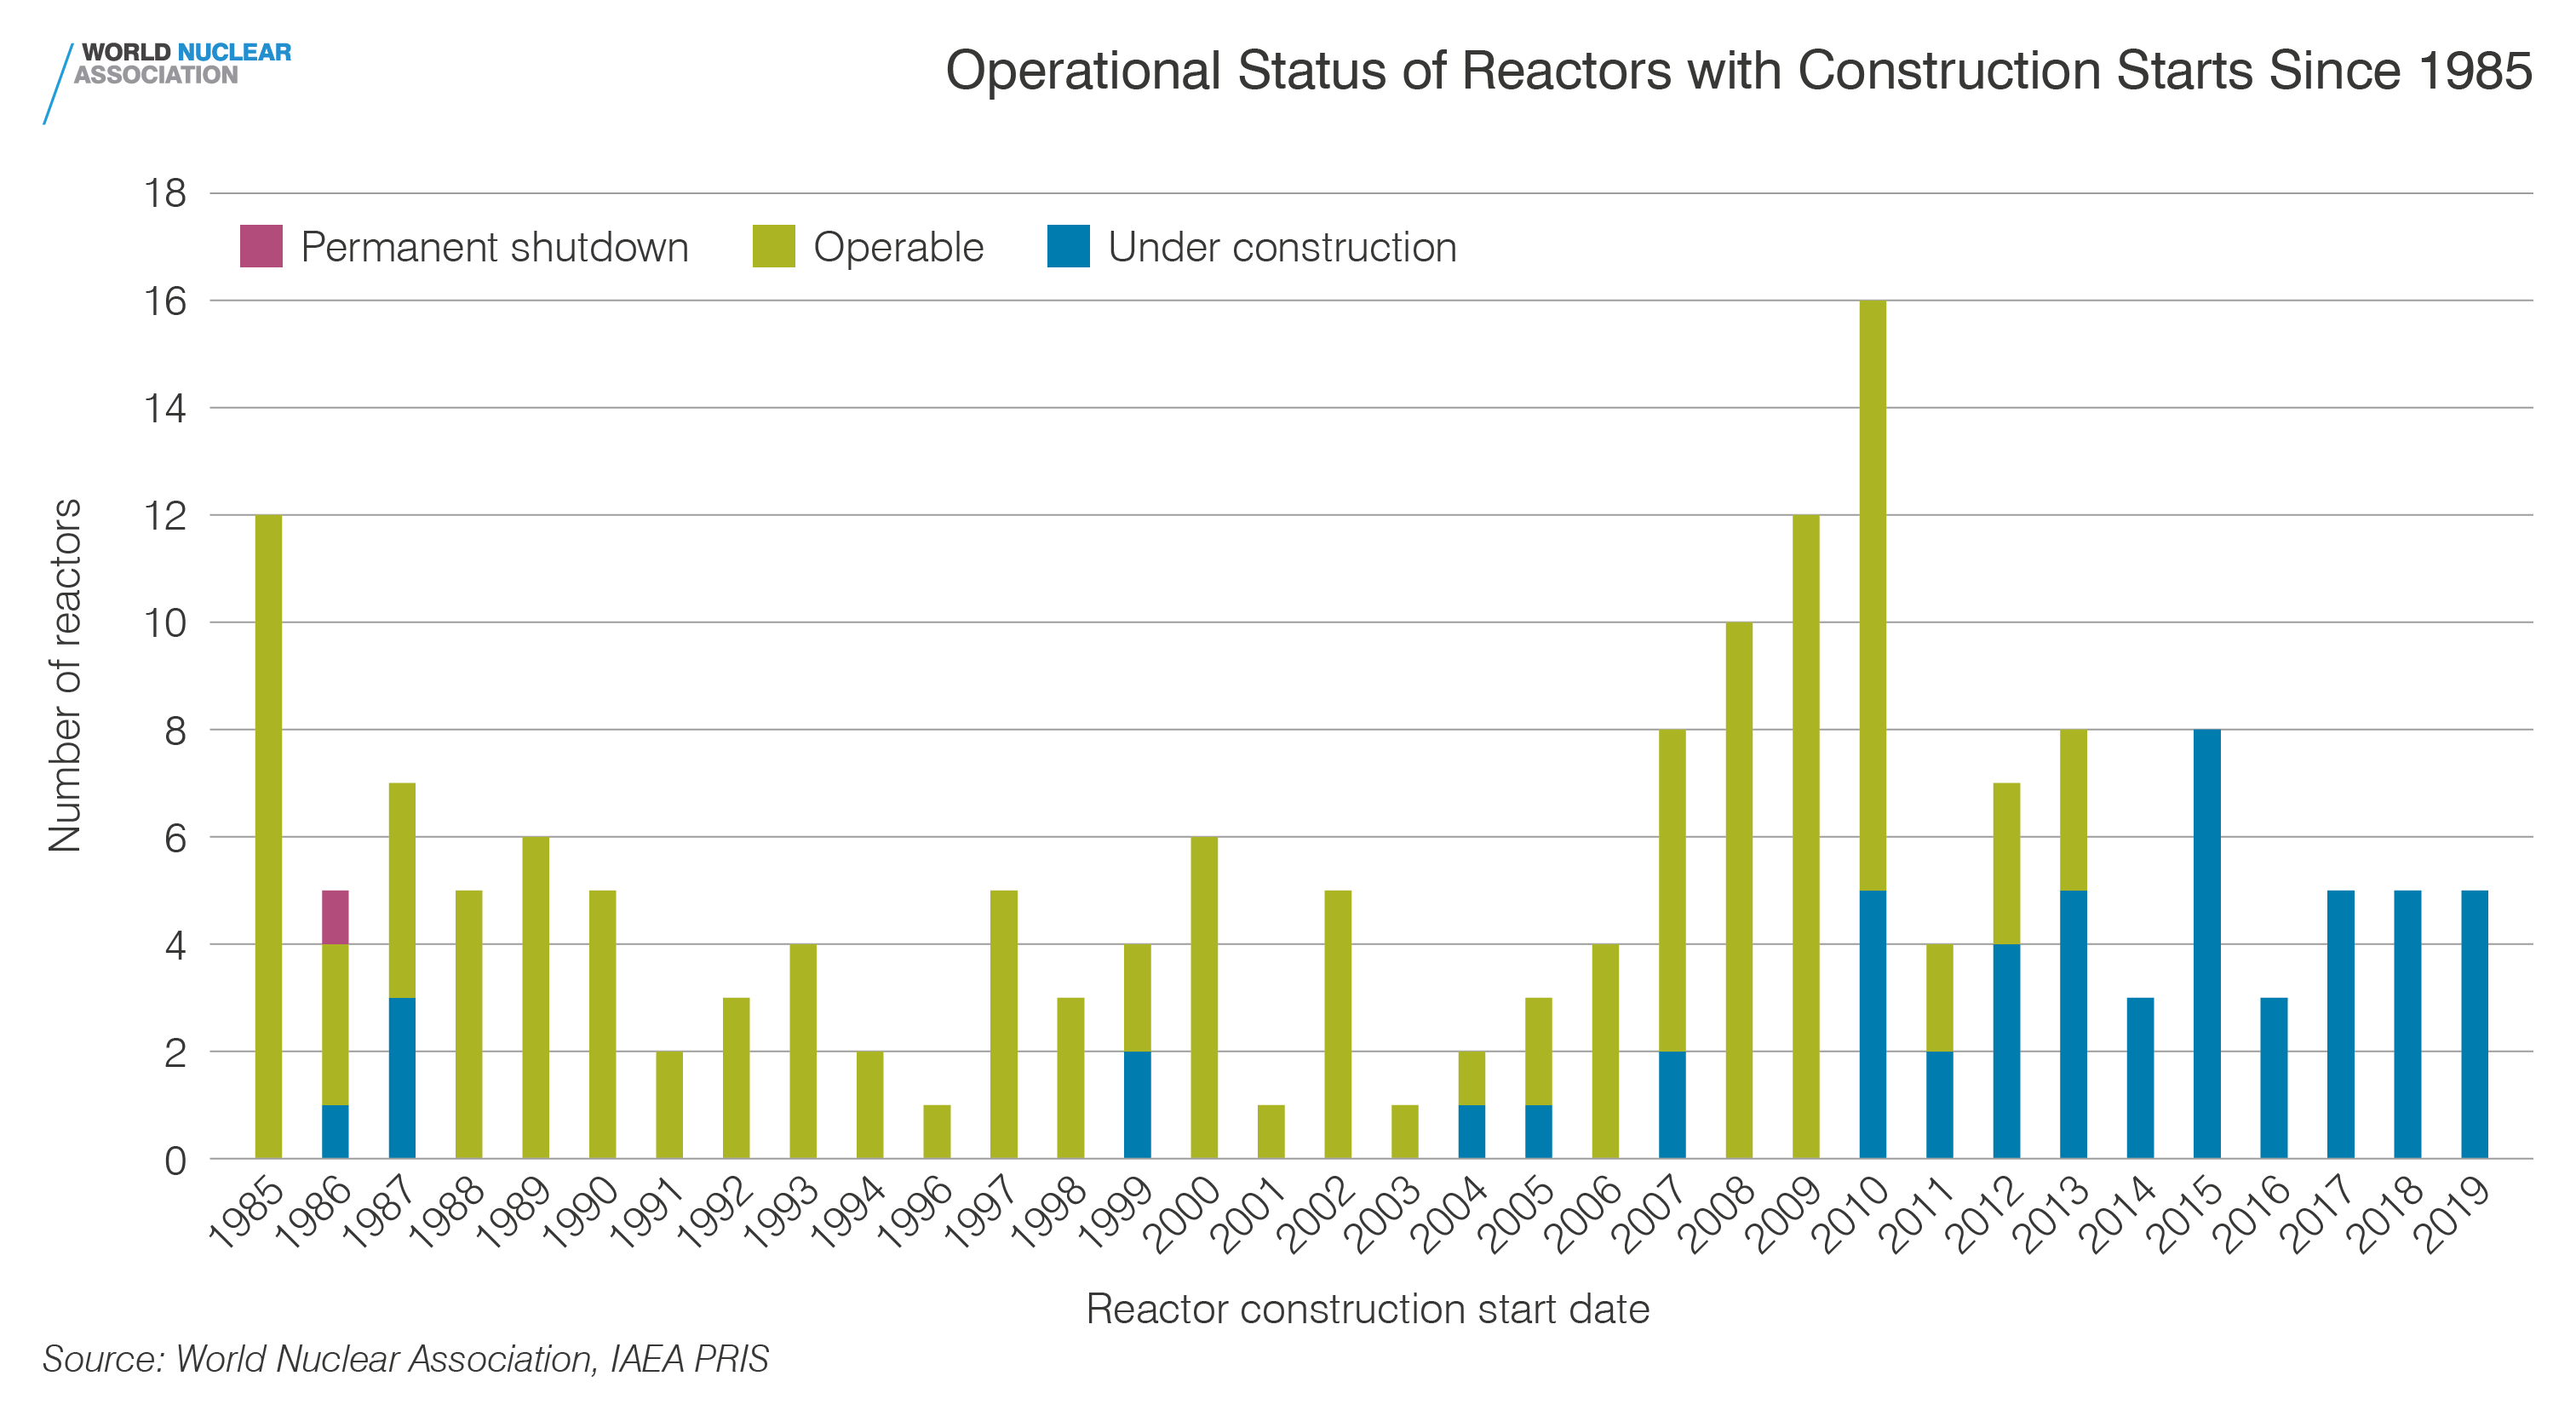 Operational status of reactors with construction starts after 1985